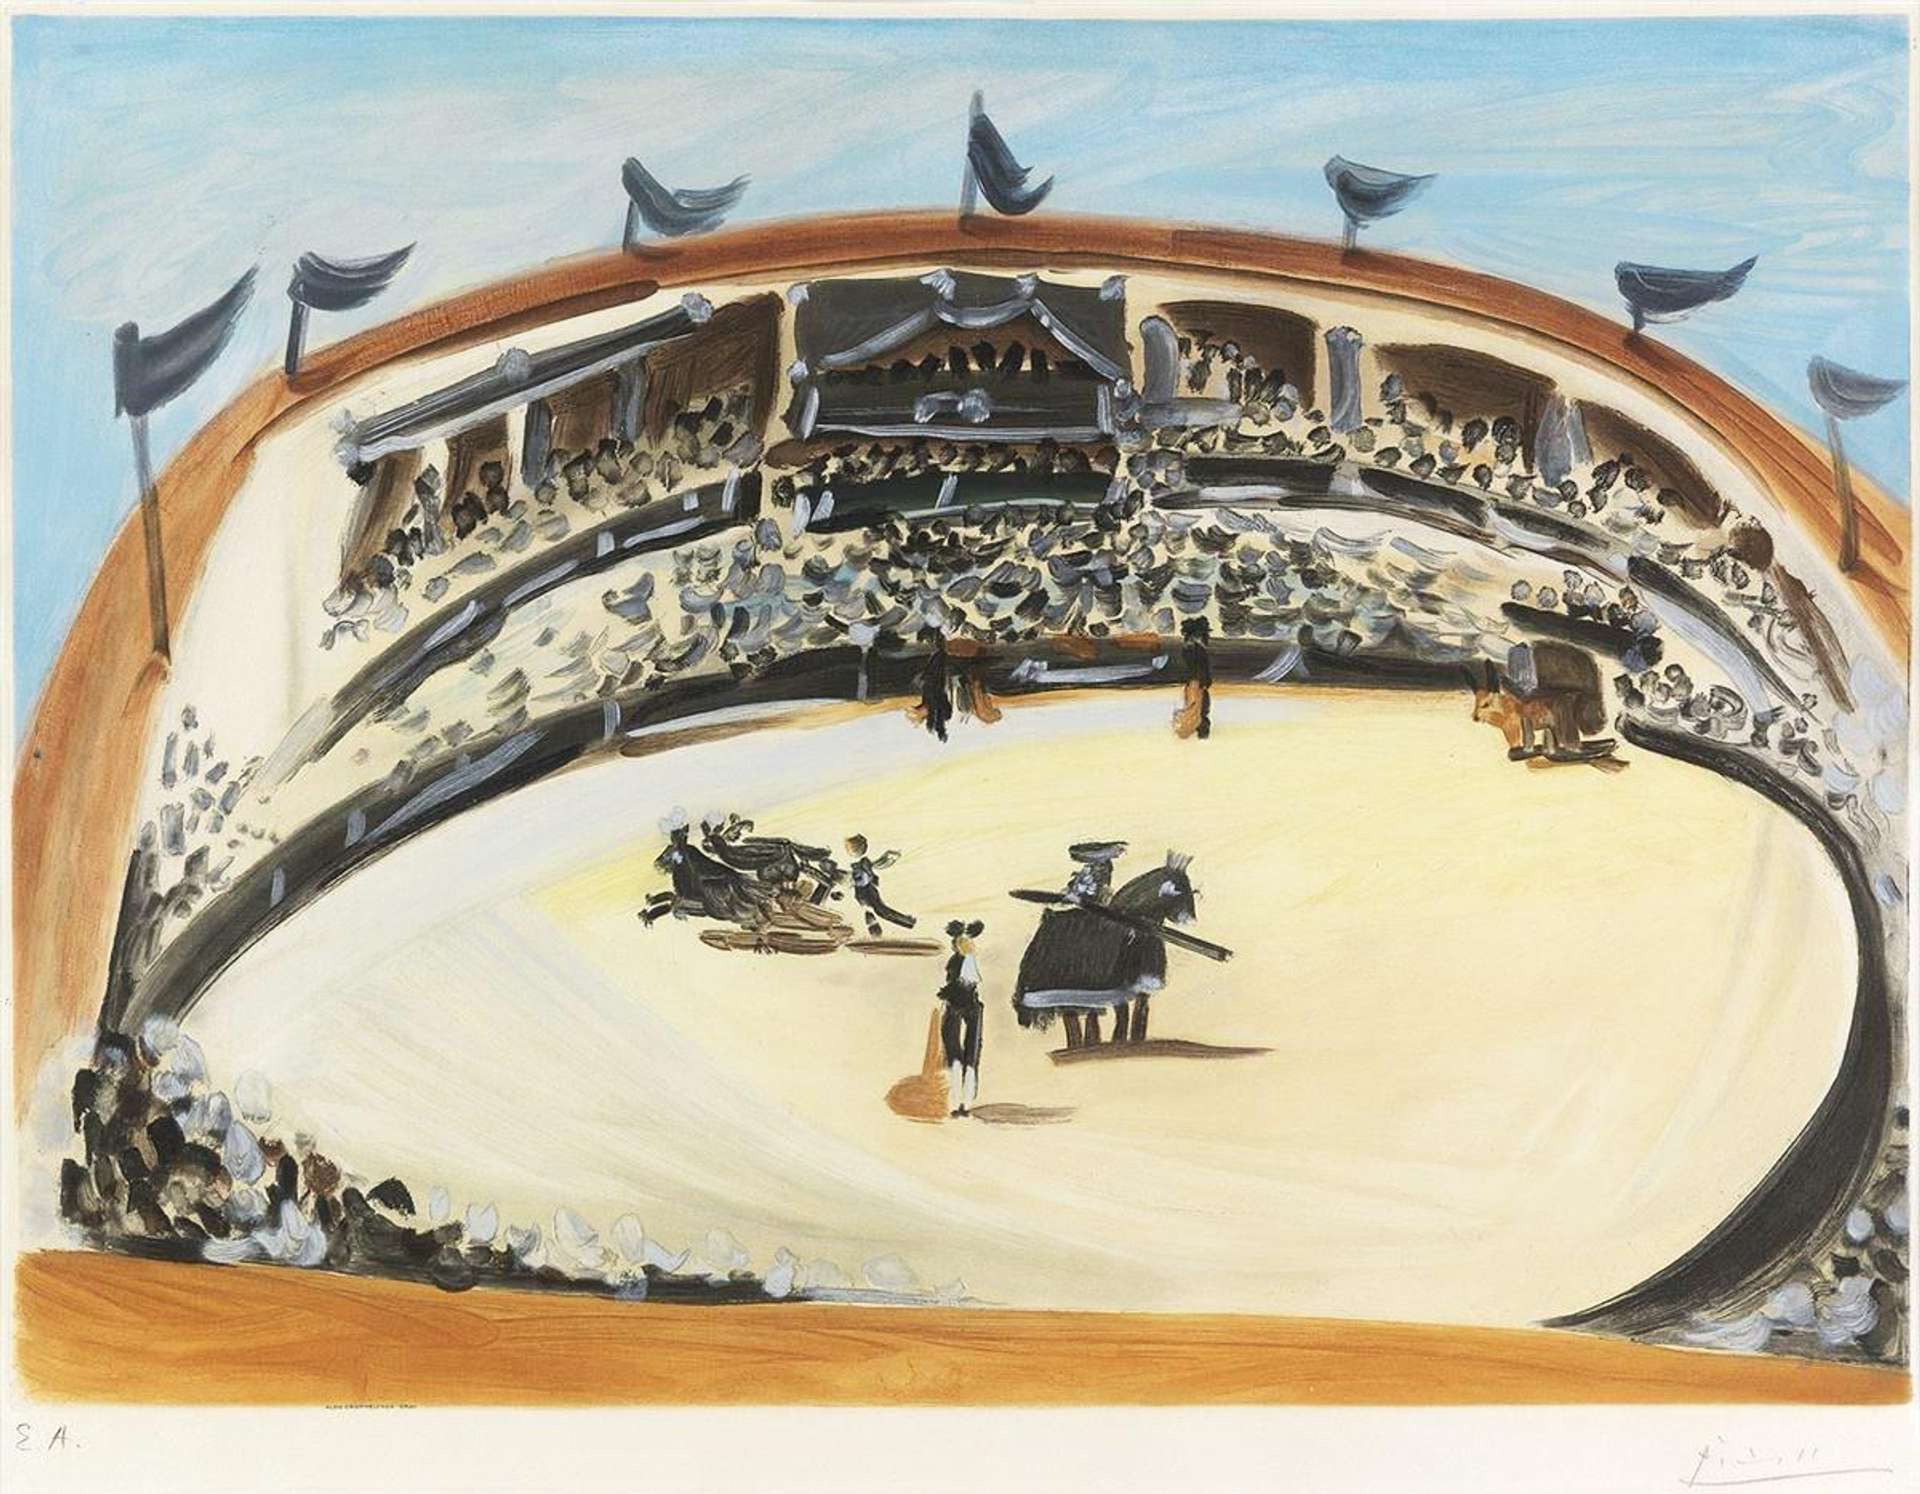 This print shows the ritual of the running of the bulls in Spain. It is a large arena with bullfighters and jockeys leading the bulls out.